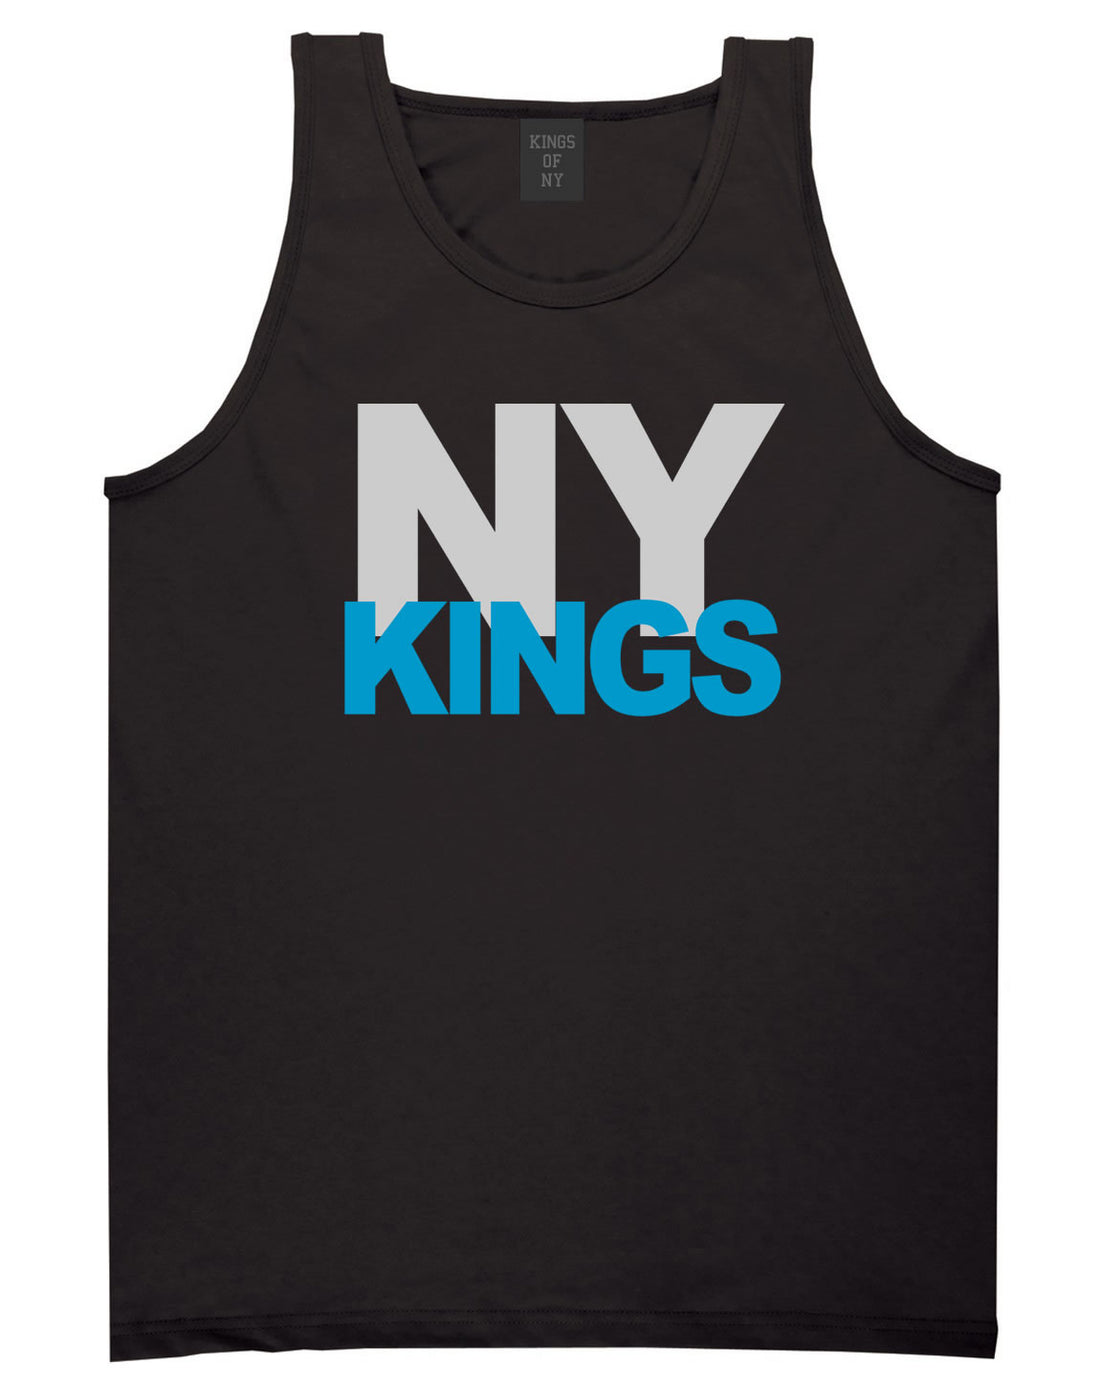 NY Kings Knows Tank Top in Black By Kings Of NY